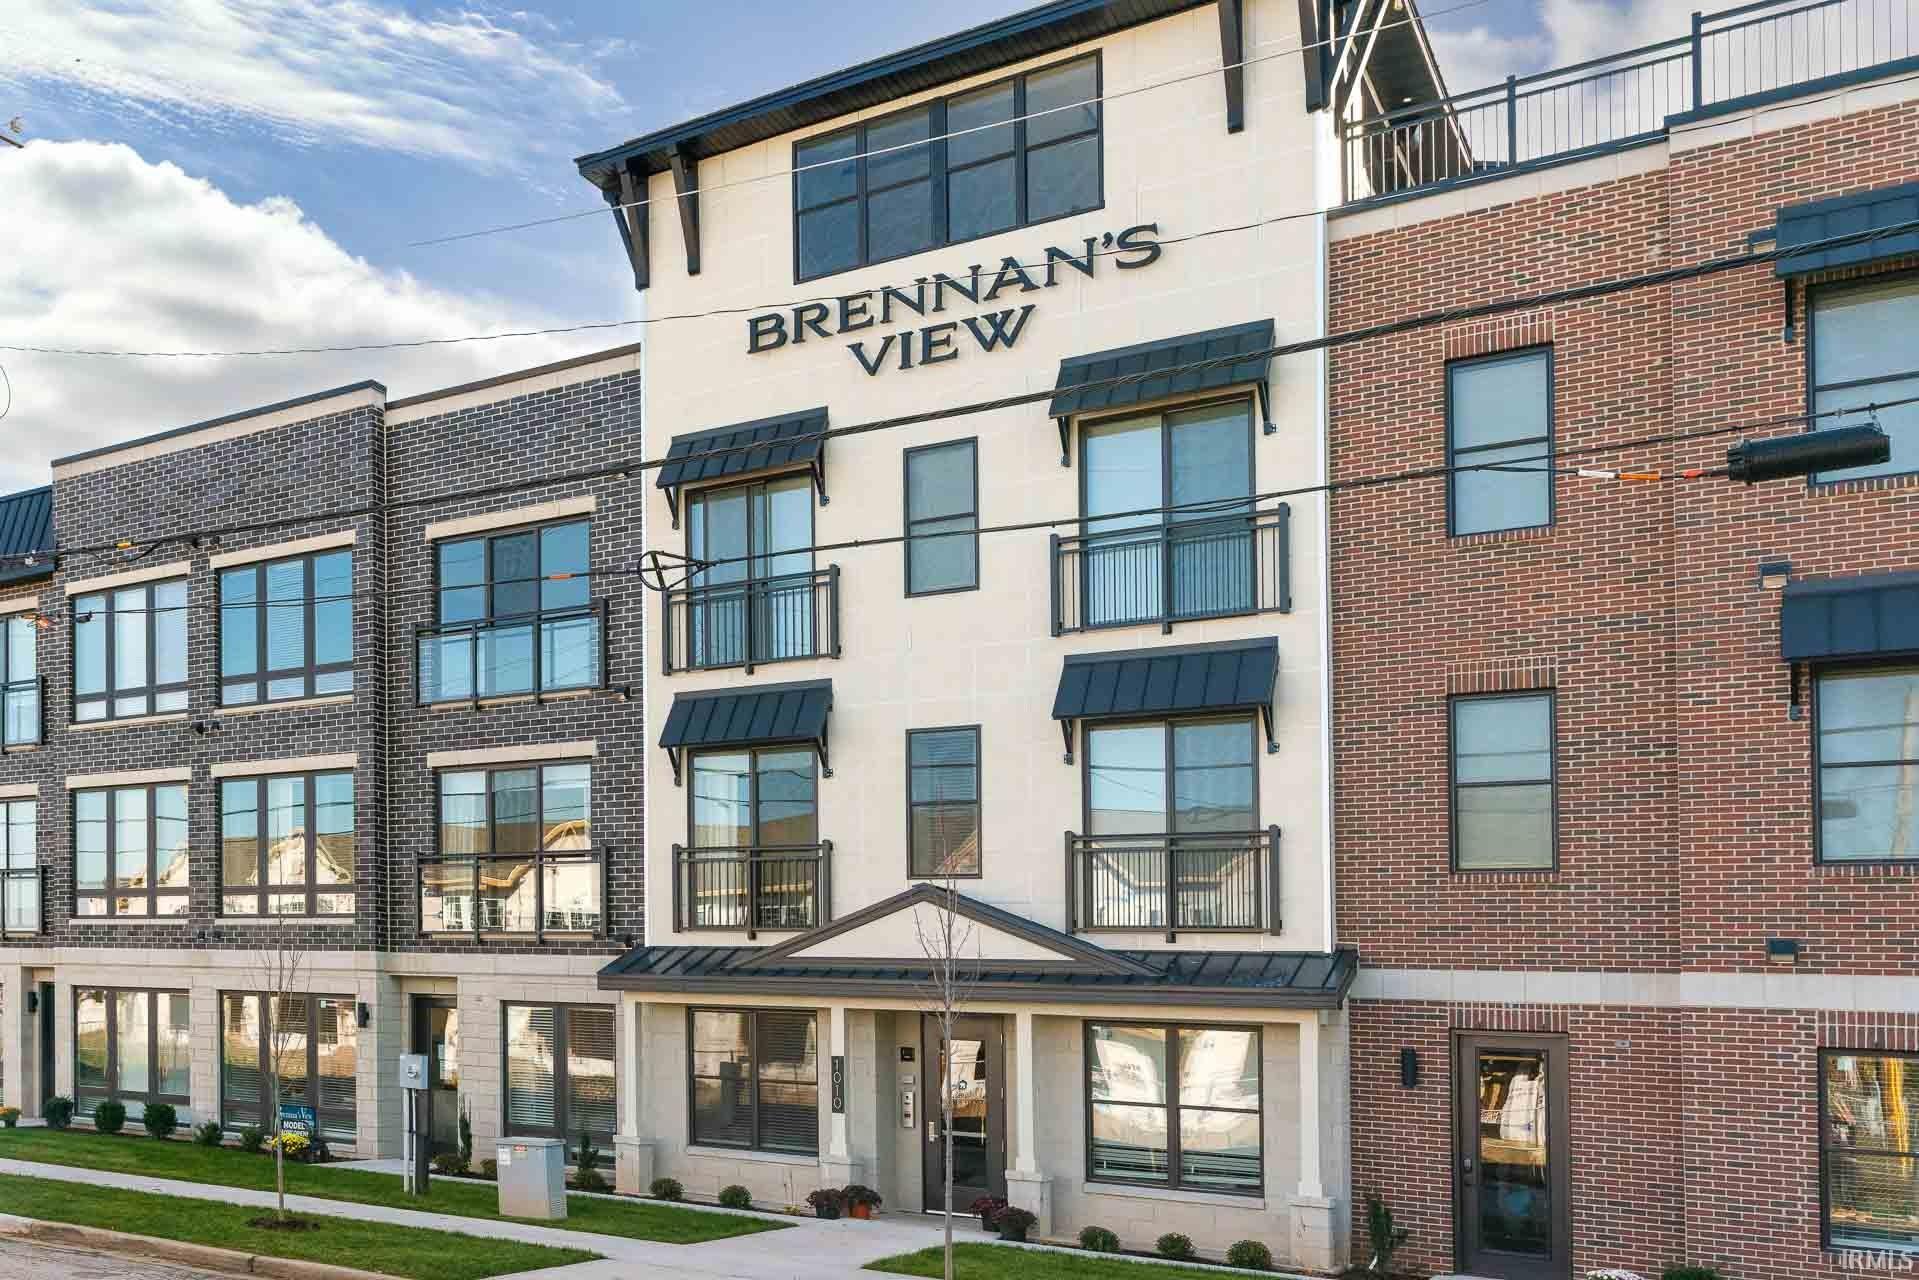 1010 Corby Unit 110 Boulevard Unit 110 Brennans View, South Bend, IN 46617